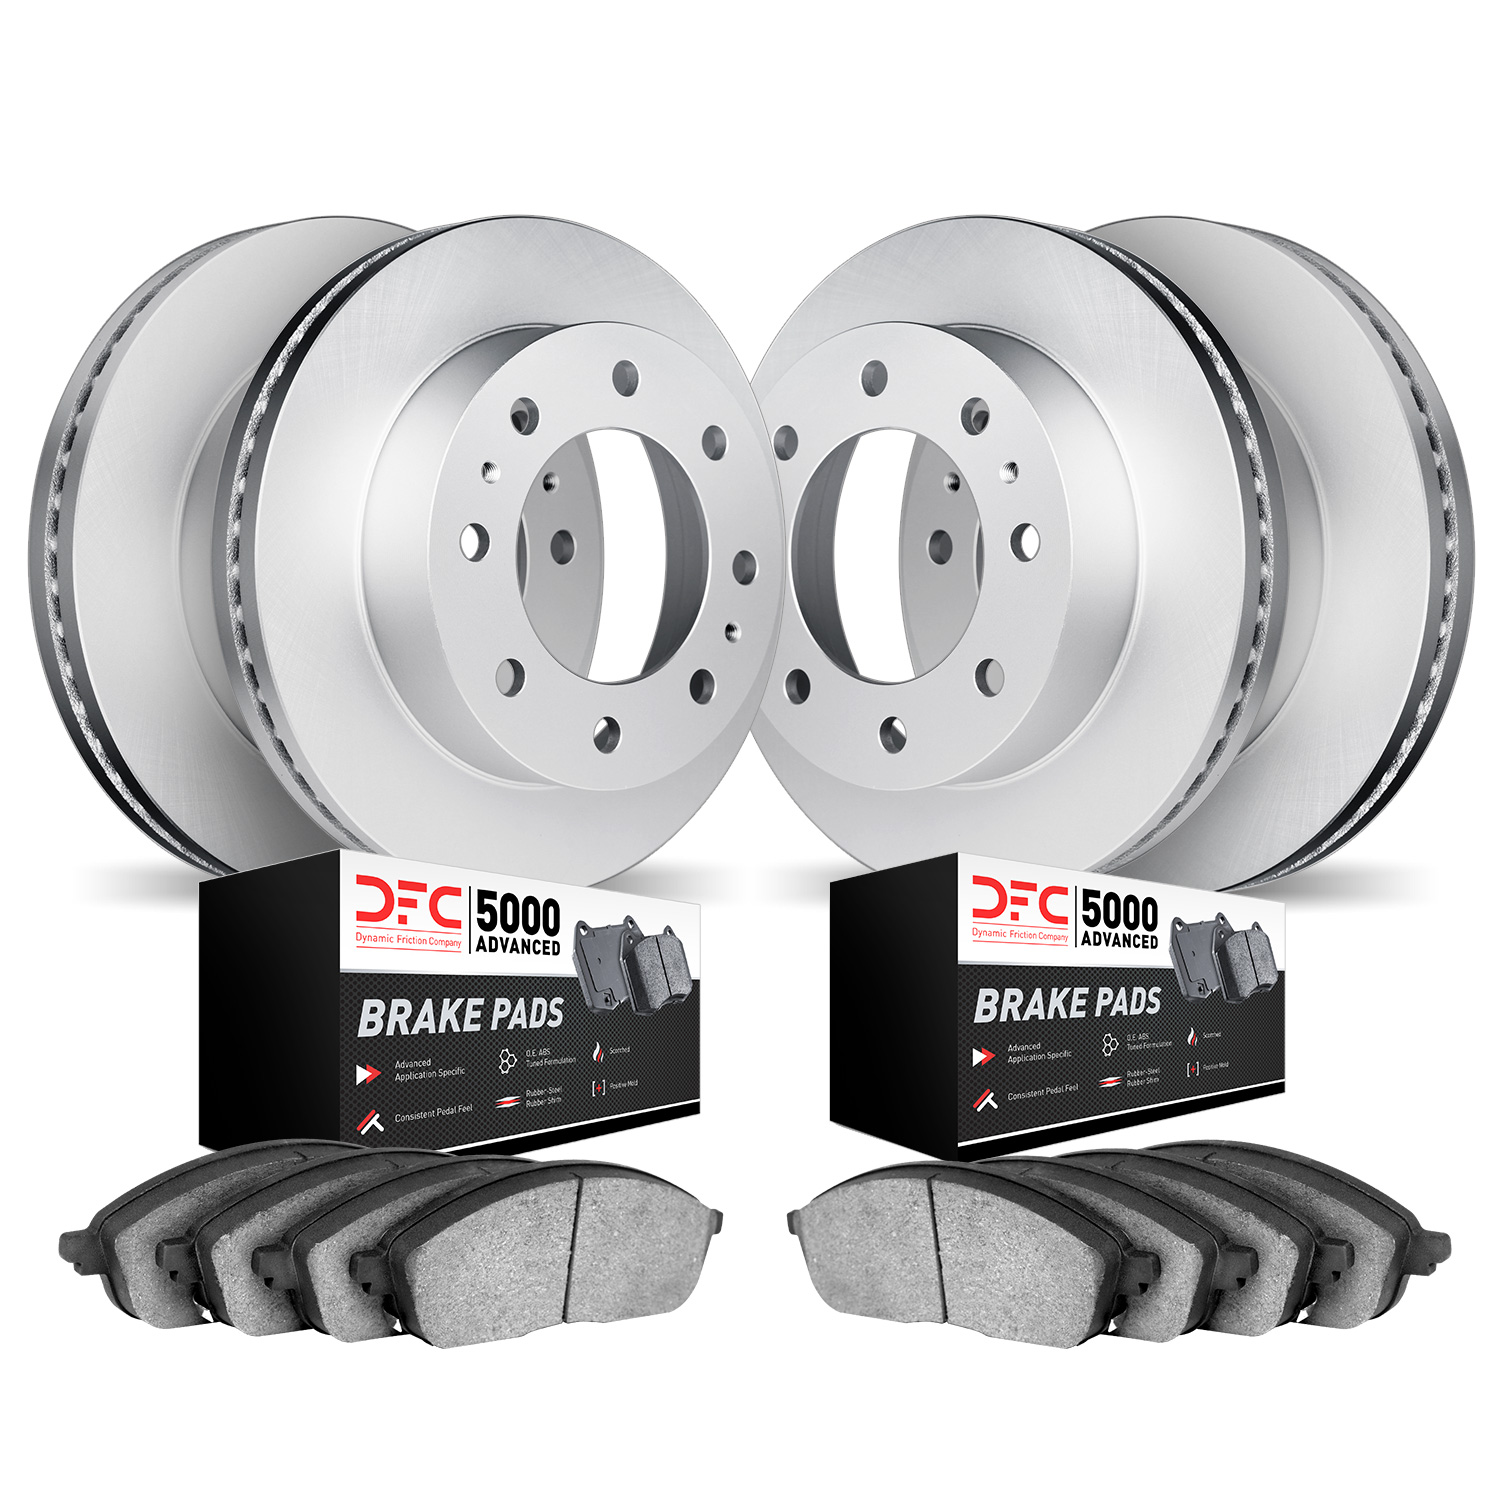 4504-54047 Geospec Brake Rotors w/5000 Advanced Brake Pads Kit, 2010-2012 Ford/Lincoln/Mercury/Mazda, Position: Front and Rear